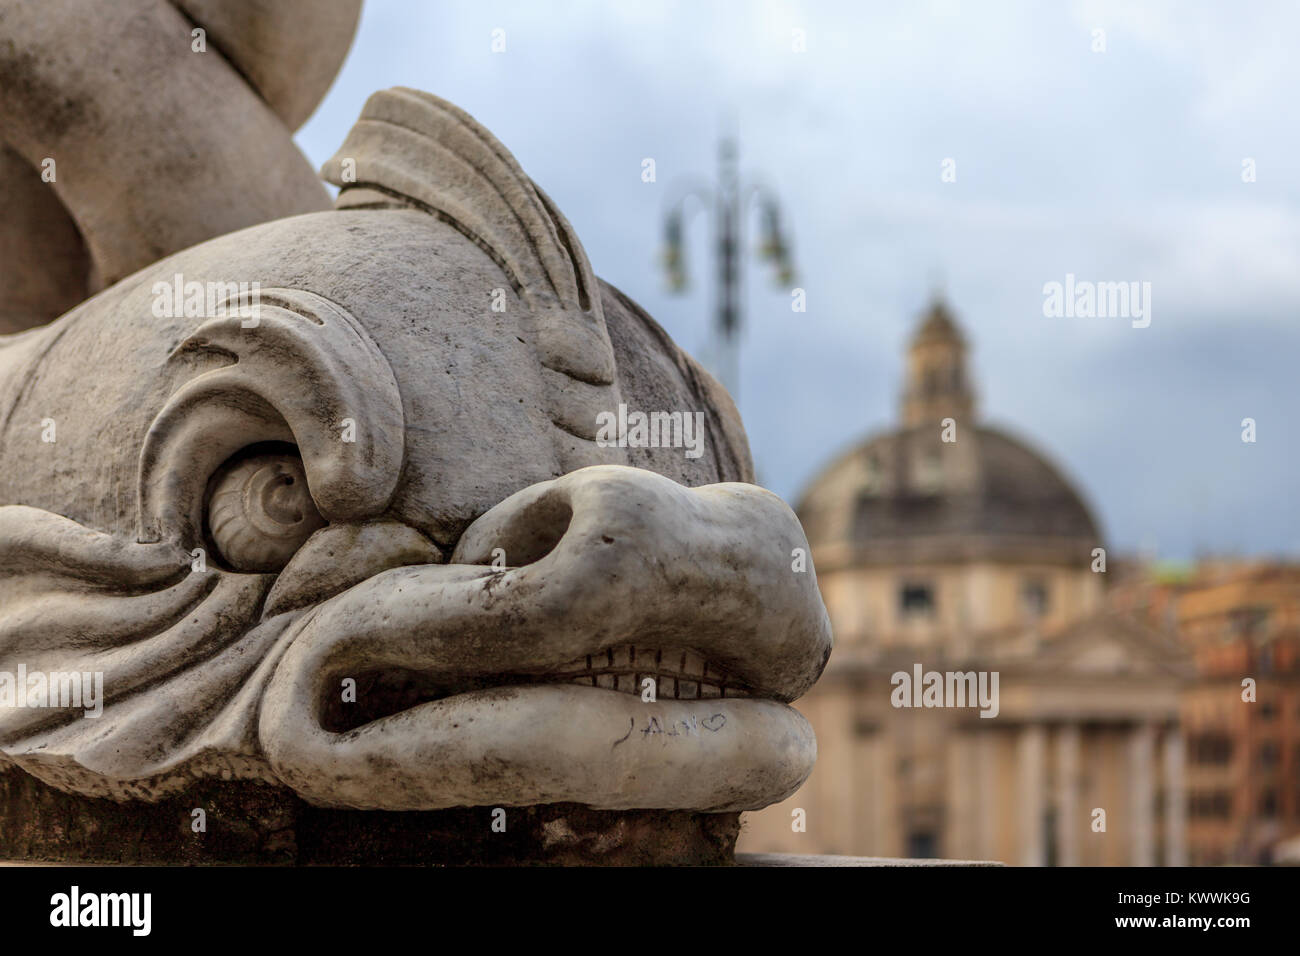 Strange fish statue showing teeth with the santa maria church in the background Stock Photo